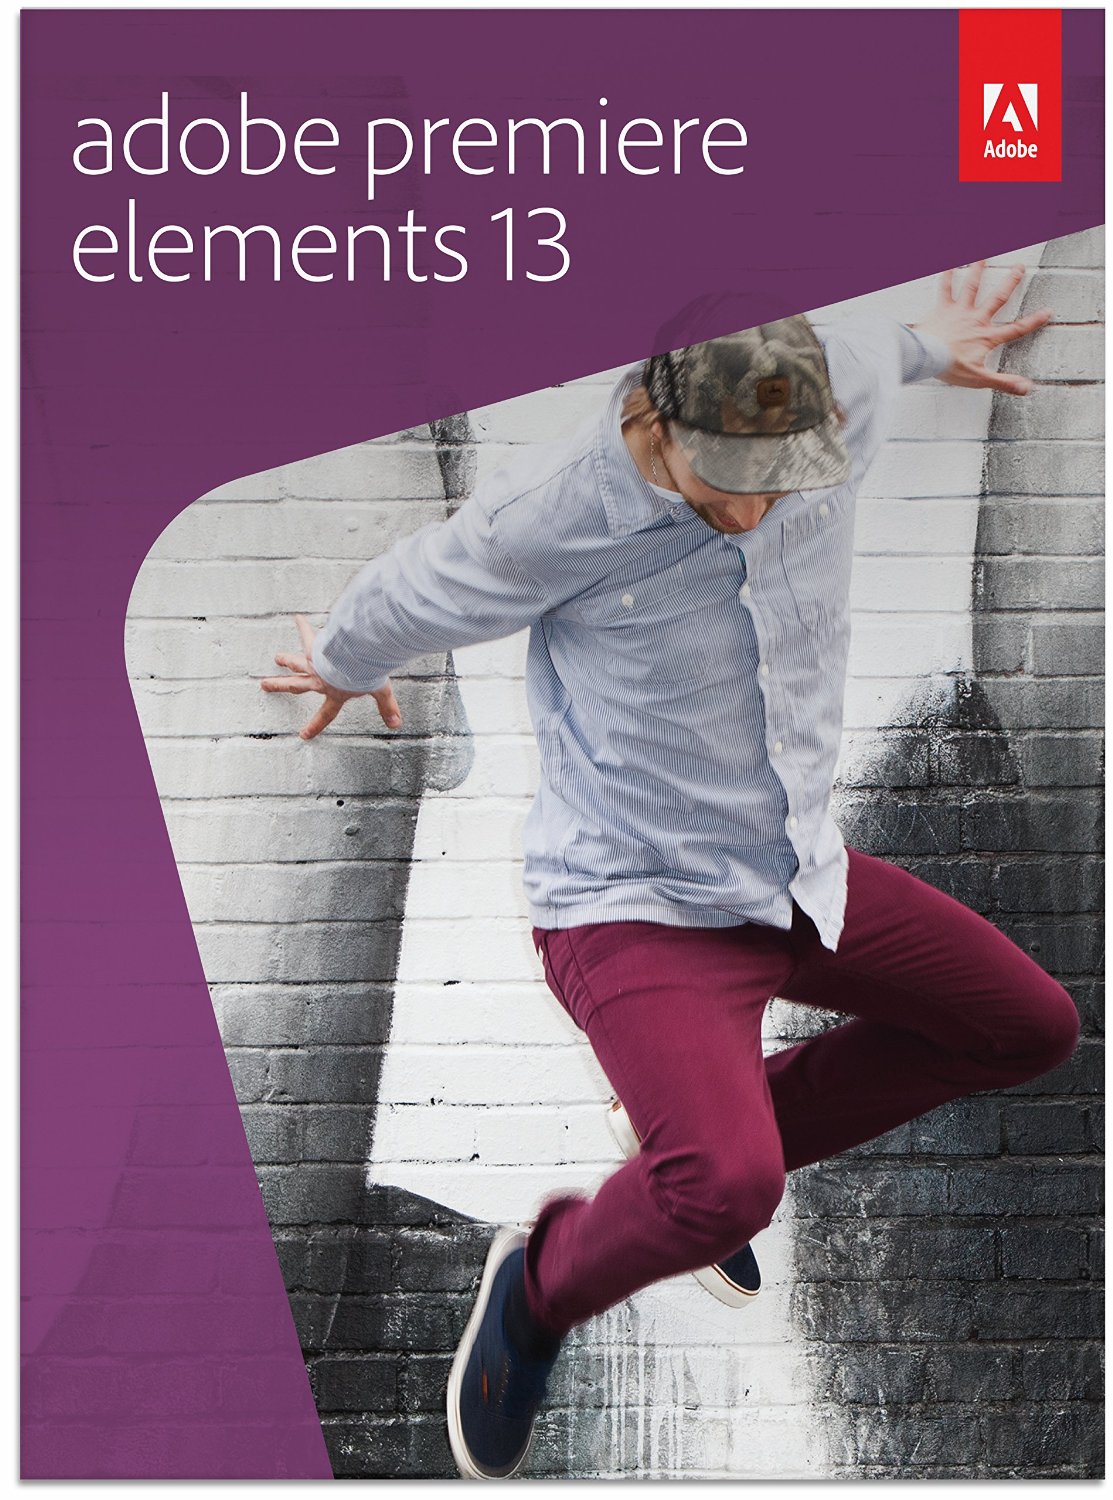 what is adobe premiere elements 13 for photos